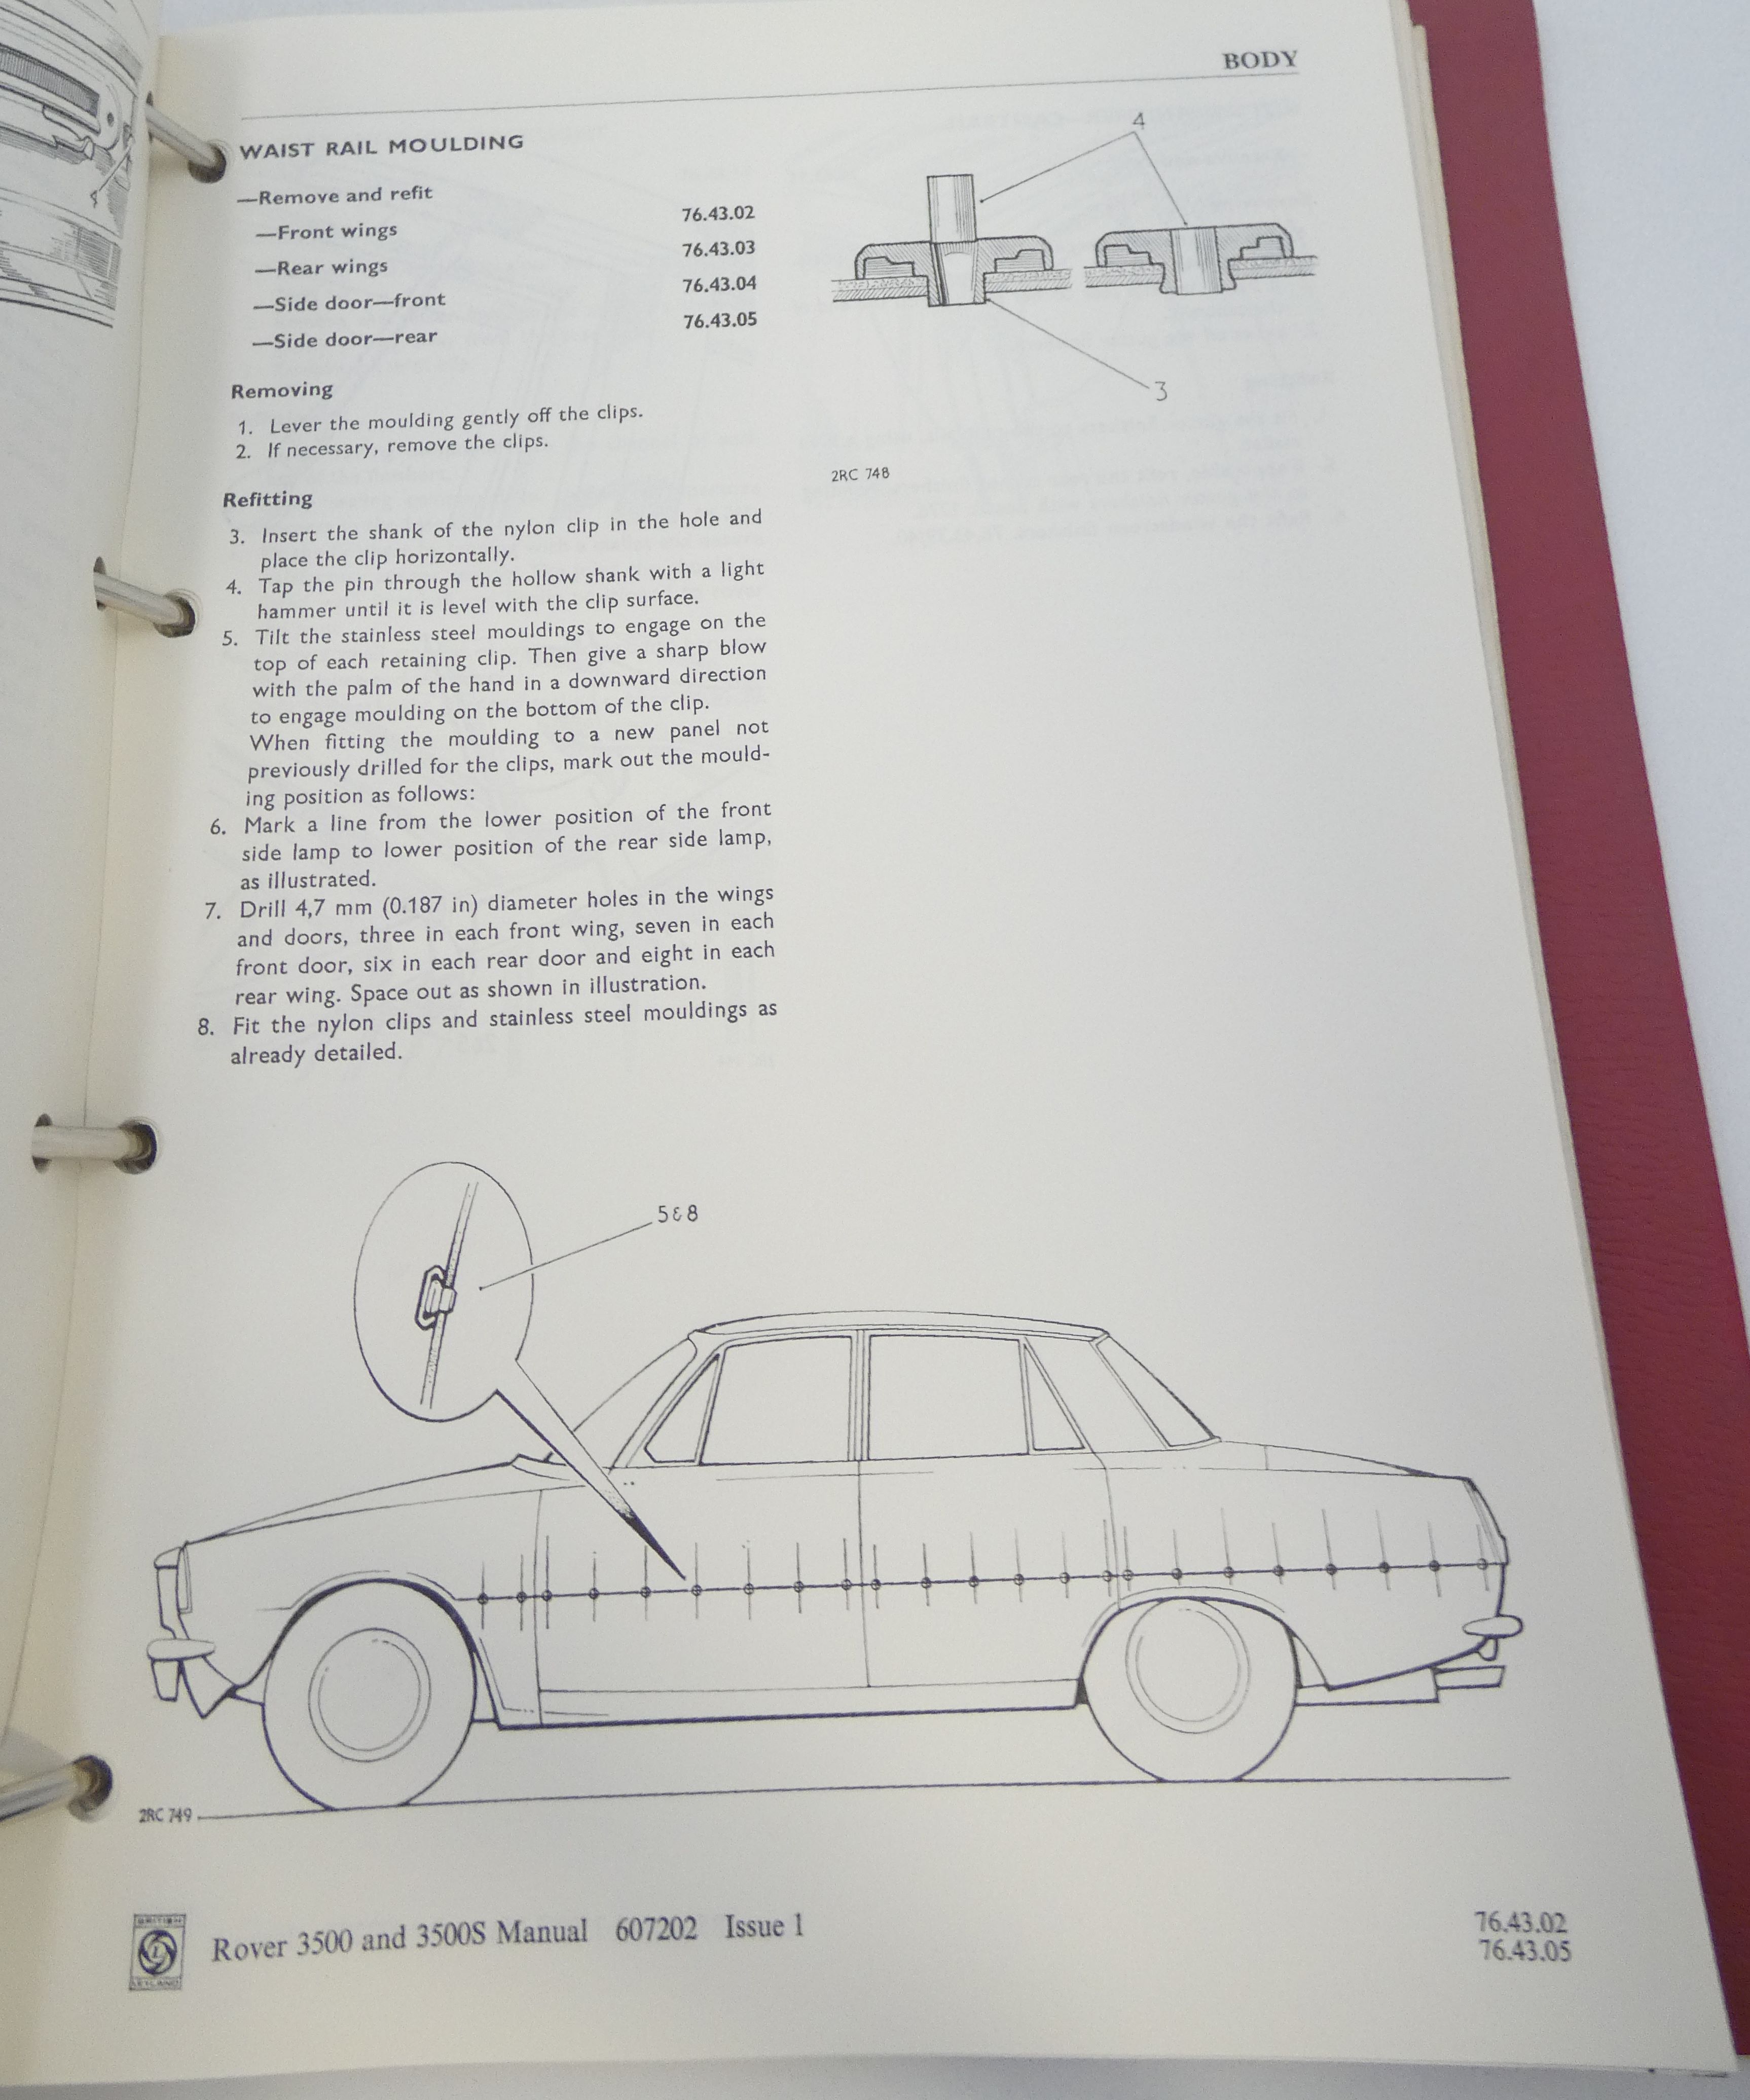 Repair Operation Manual for Rover 3500 (automatic gearbox models) and Rover 3500S (synchromesh gearbox models) vol. 2